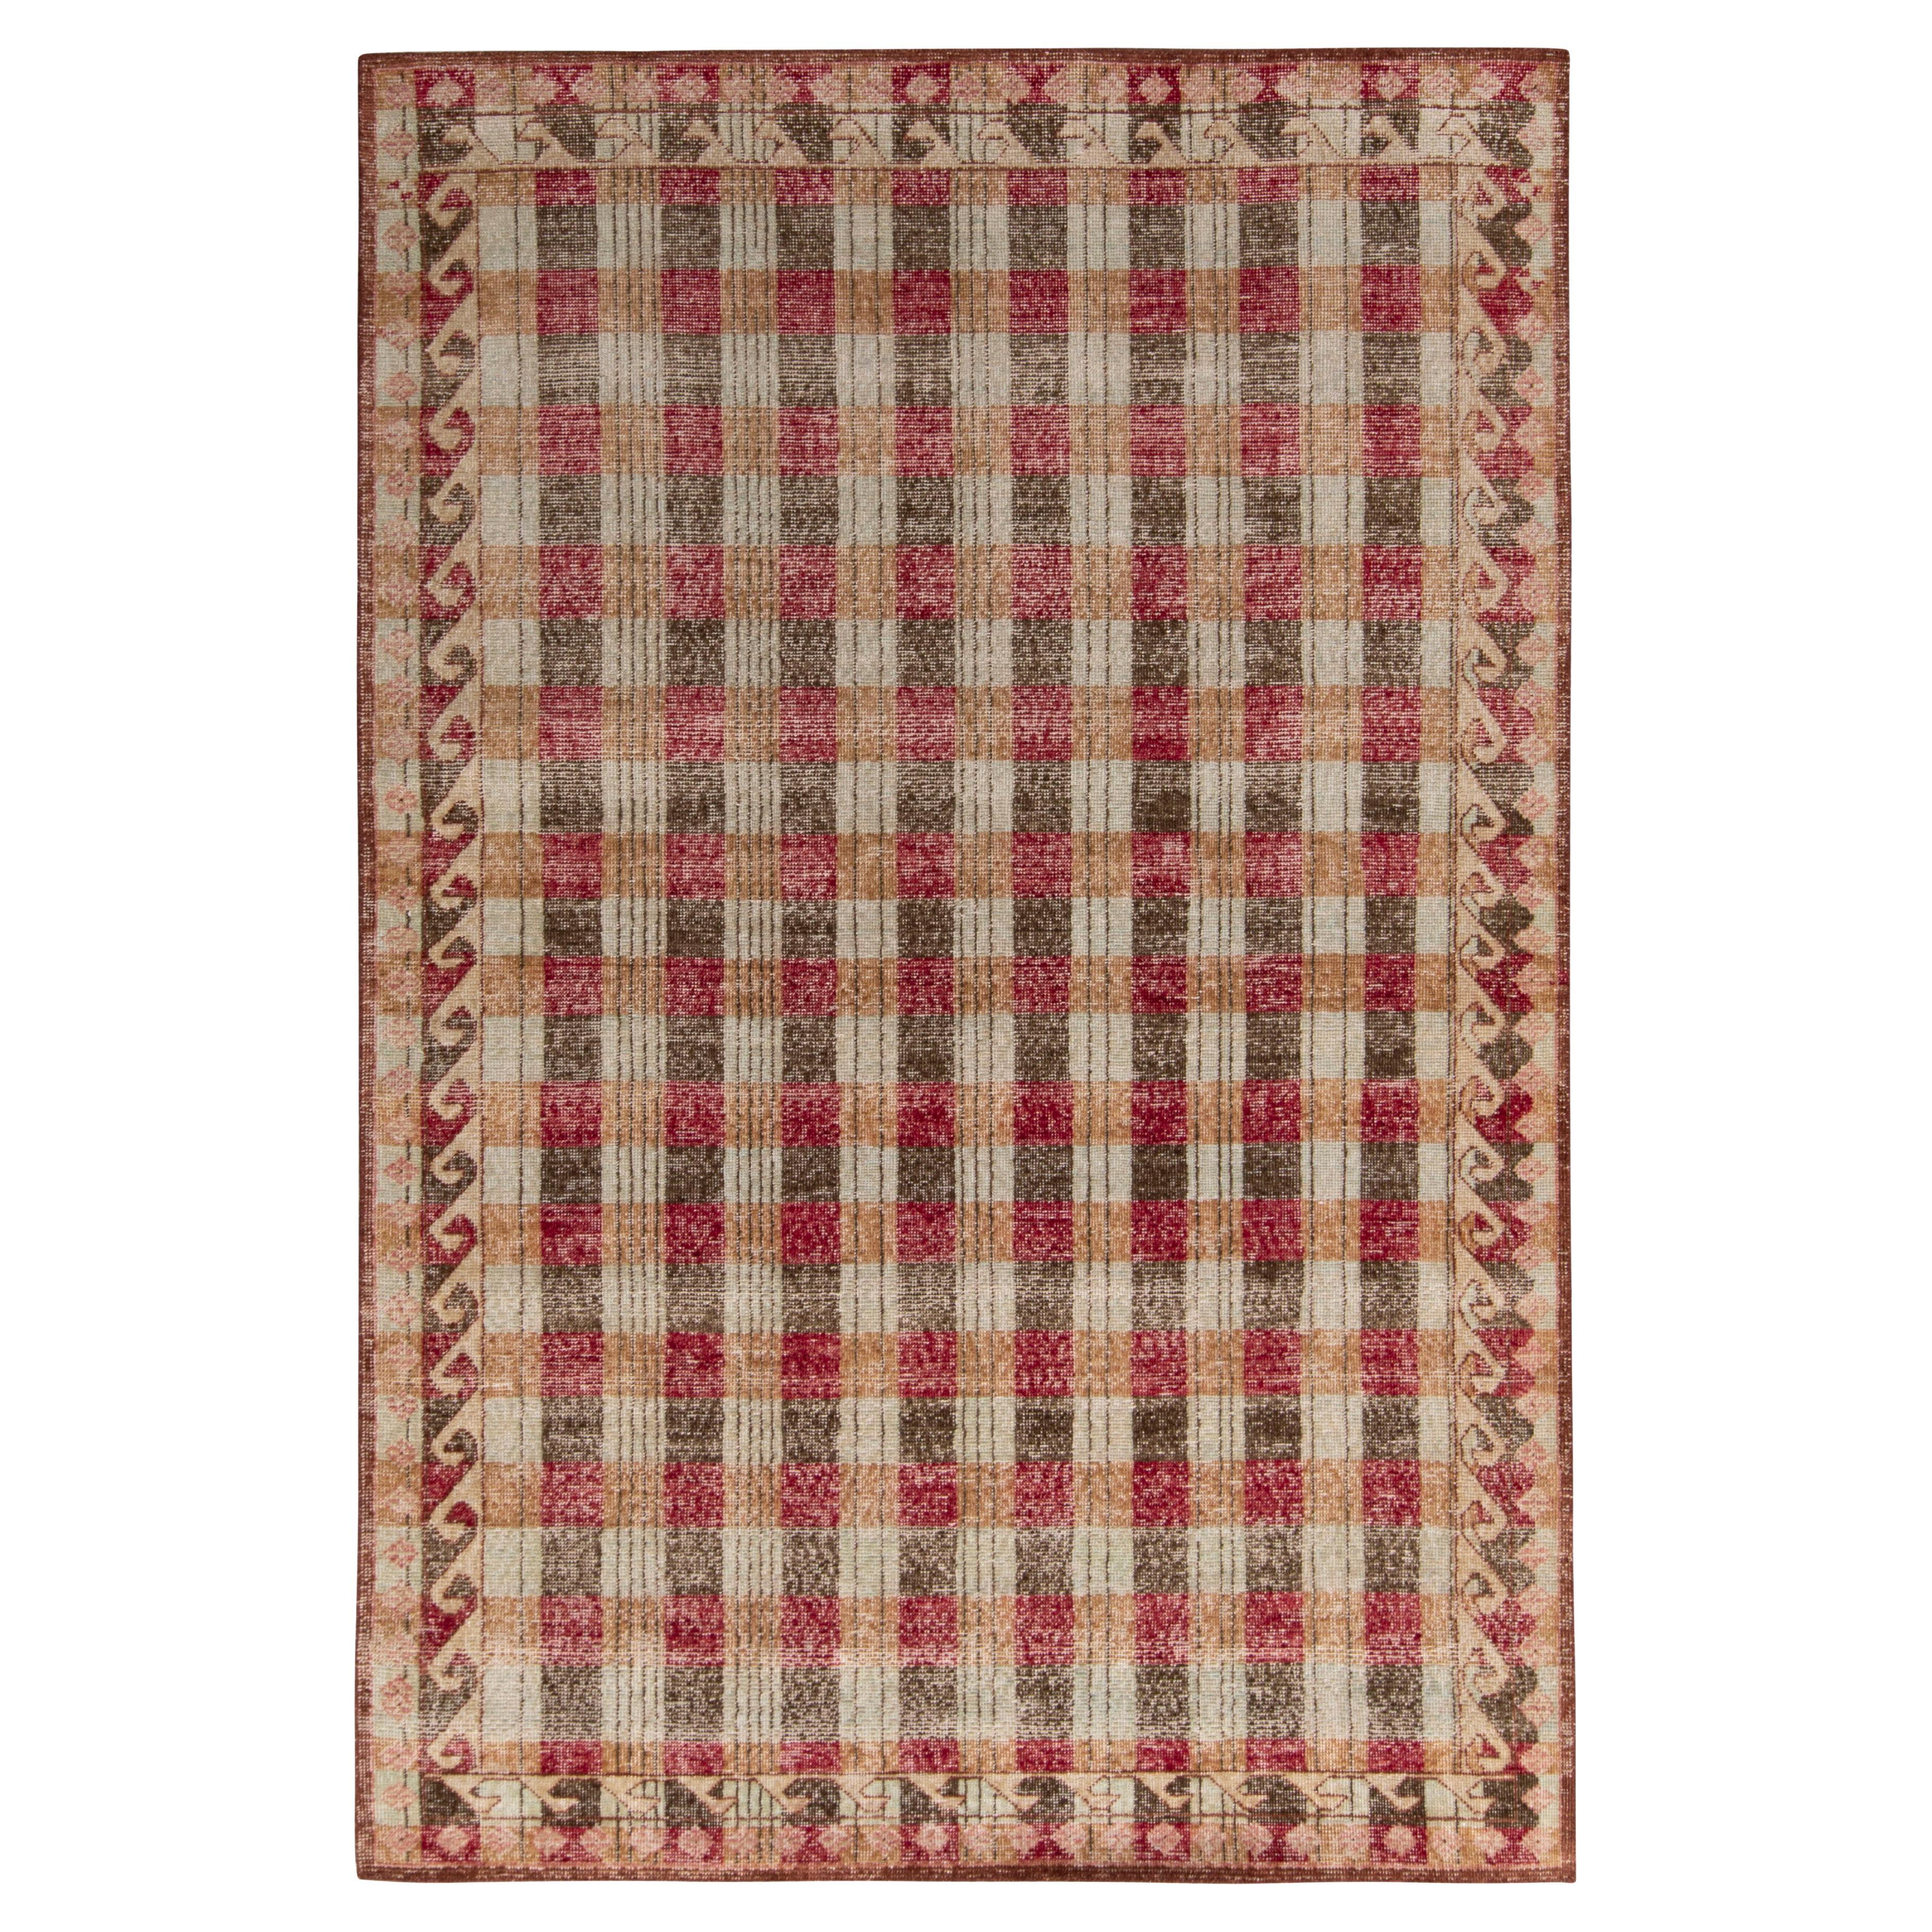 Rug & Kilim's Distressed Classic Style Teppich in Beige-Braun, Rot Geometrisches Muster